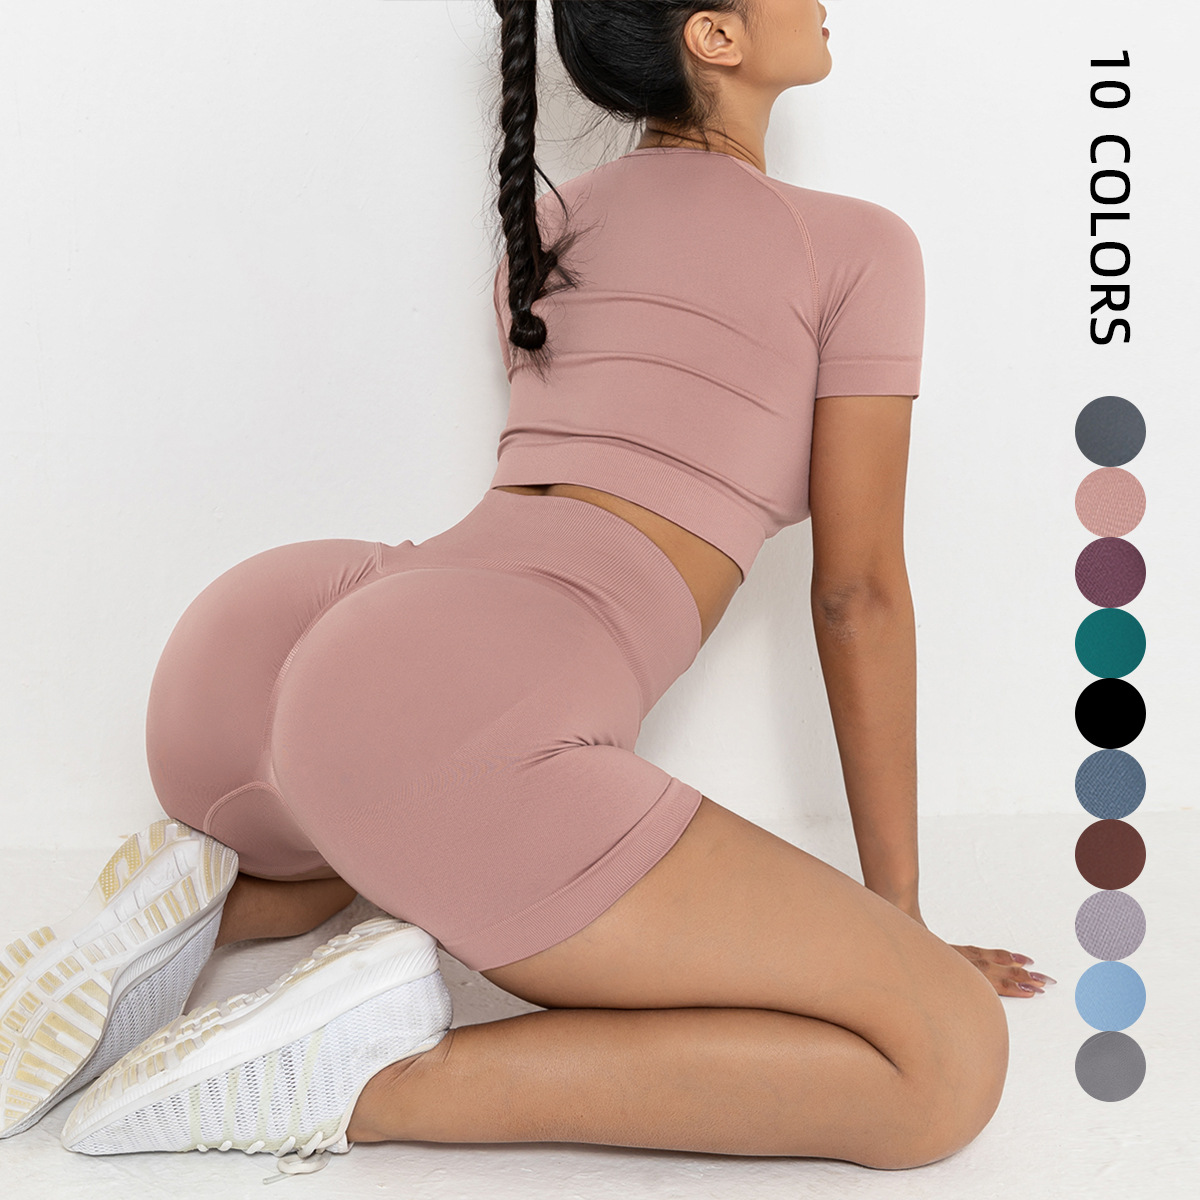 Moisture-Wicking Yoga Pants for the Fashion-Forward Fitness Enthusiast | ZHIHUI